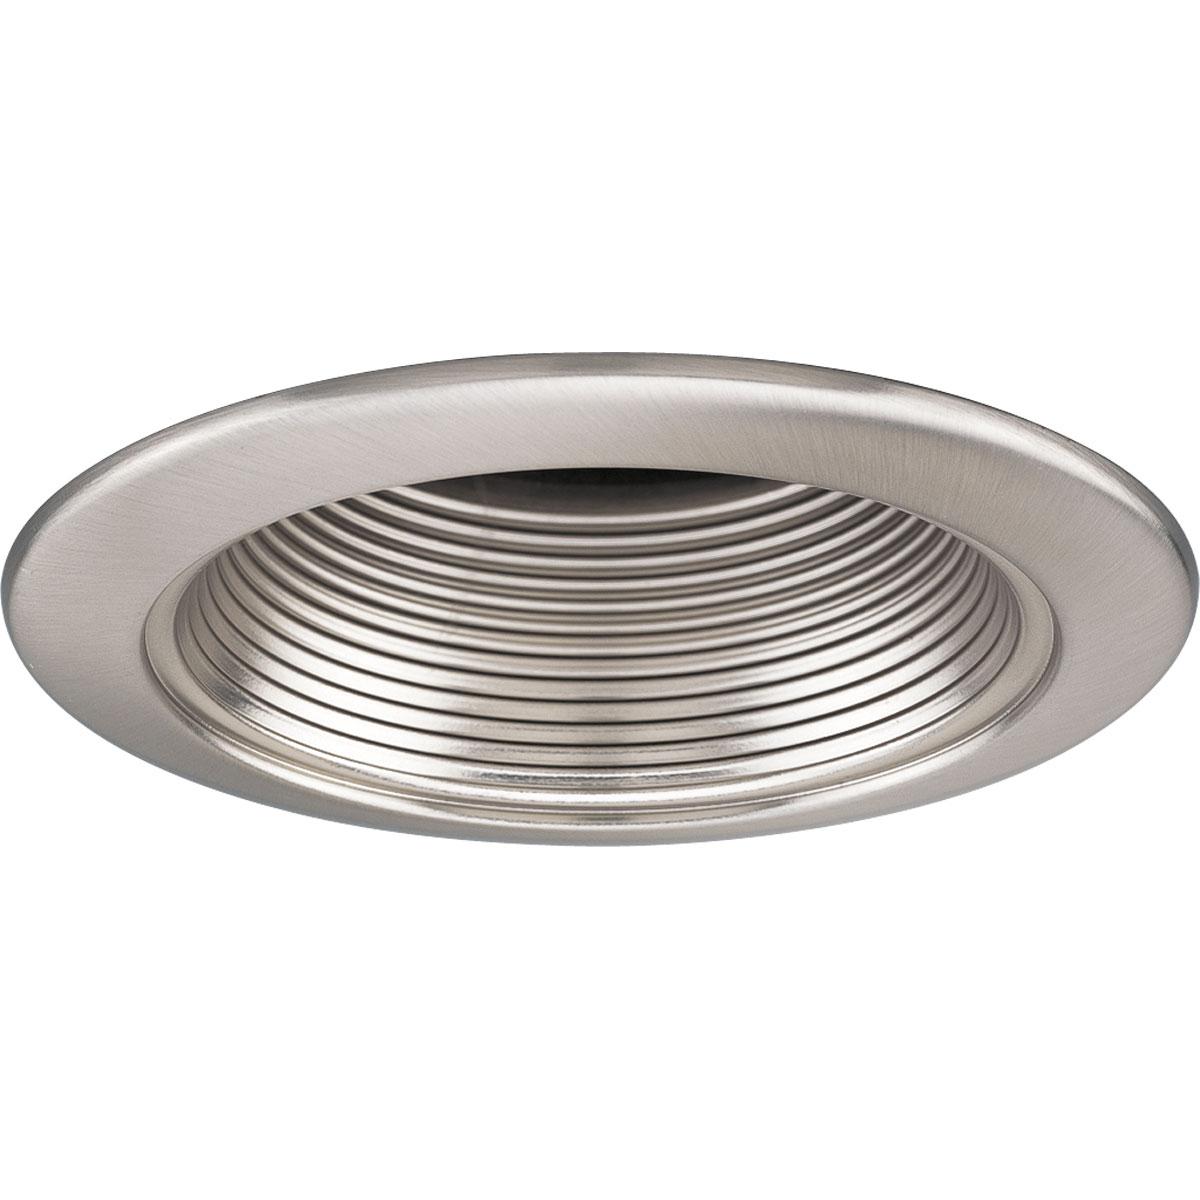 Hubbell P8044-09 4" Step Baffle trim in a Brushed Nickel finish with unpainted flanges to match the baffle finish. 360 positioning. 5" outside diameter.  ; Brushed Nickel finish. ; Matching flange. ; No light leaks around trim flange.